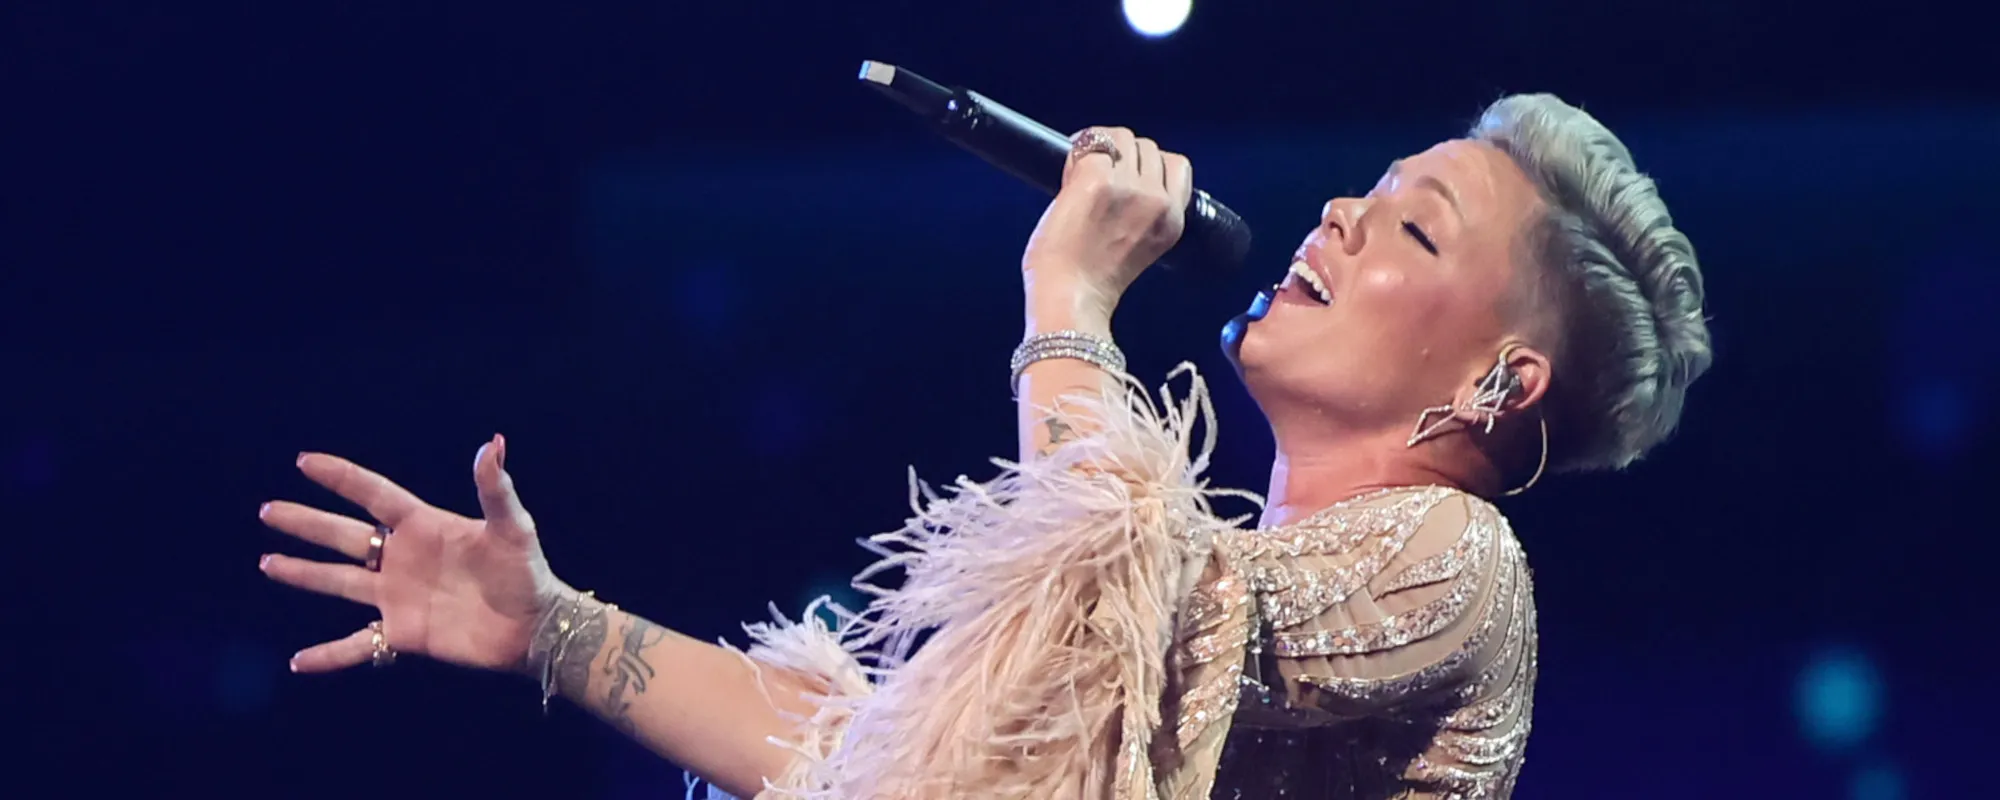 P!nk Denies Flying Israeli Flags on Her Tour: “At This Point, Breathing Is Controversial”